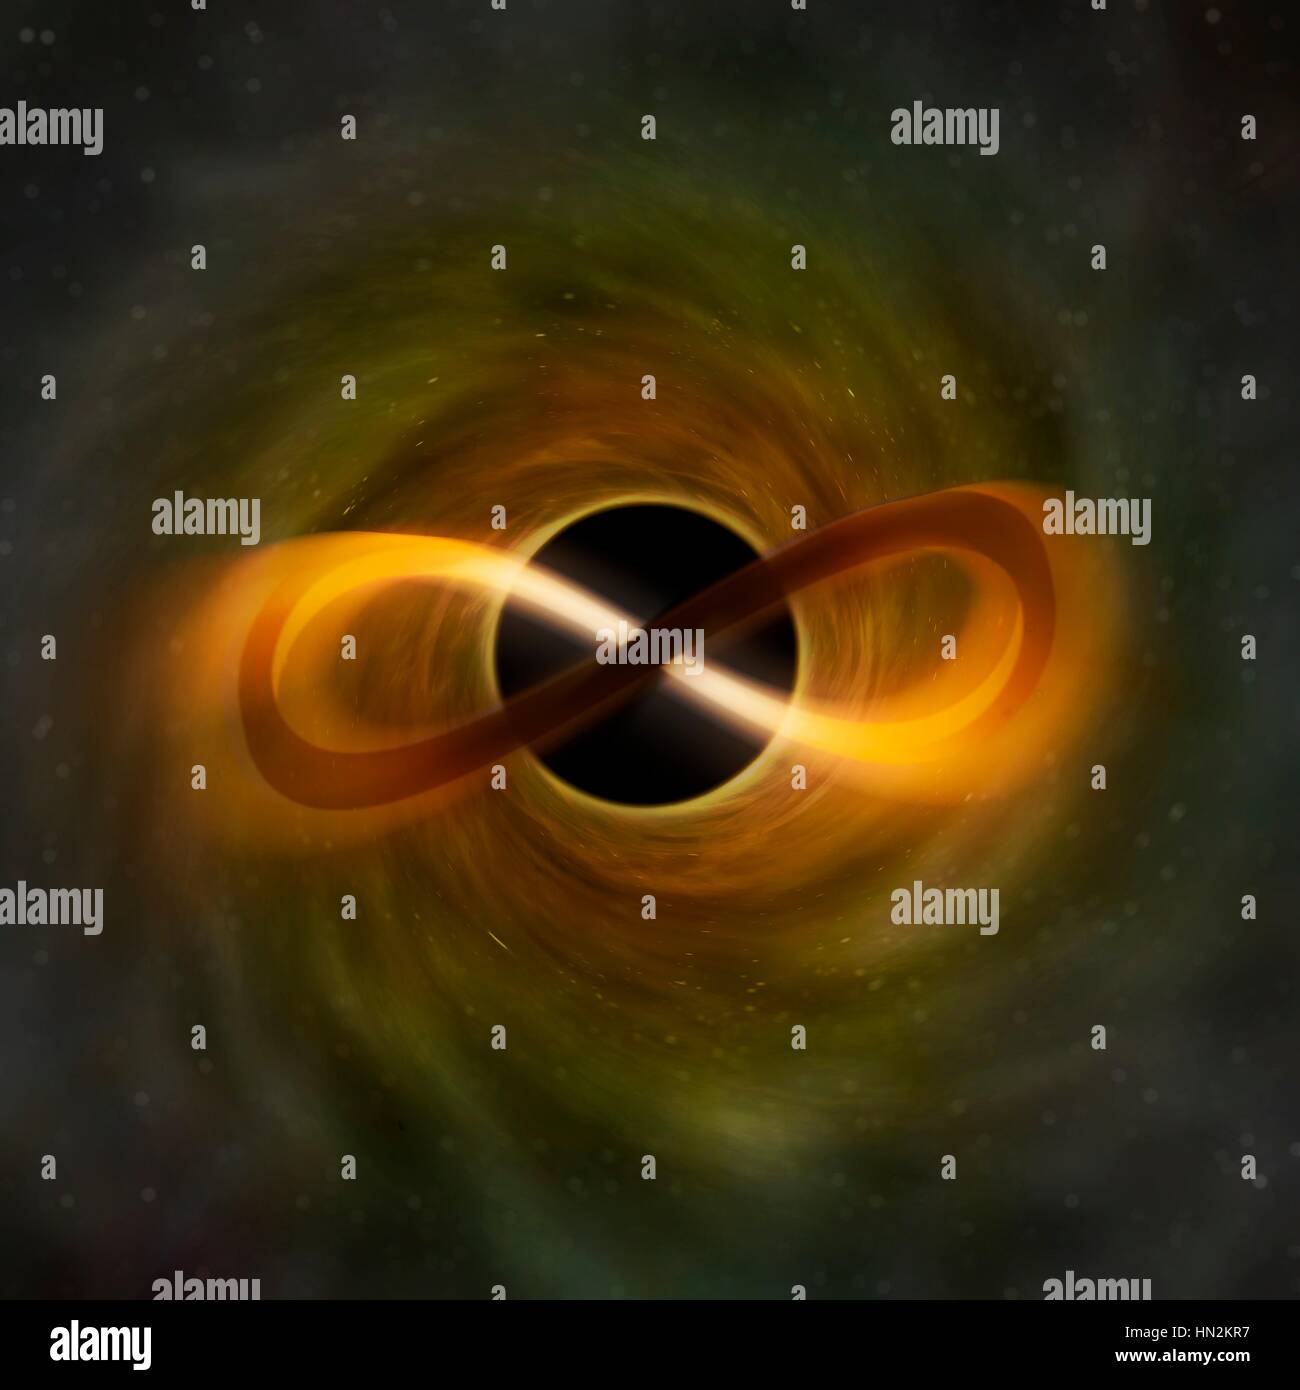 Infinity loop seen against a cosmic background representing a black hole. This symbol represents the mathematical concept of an infinite, unbounded, or limitless amount. Stock Photo